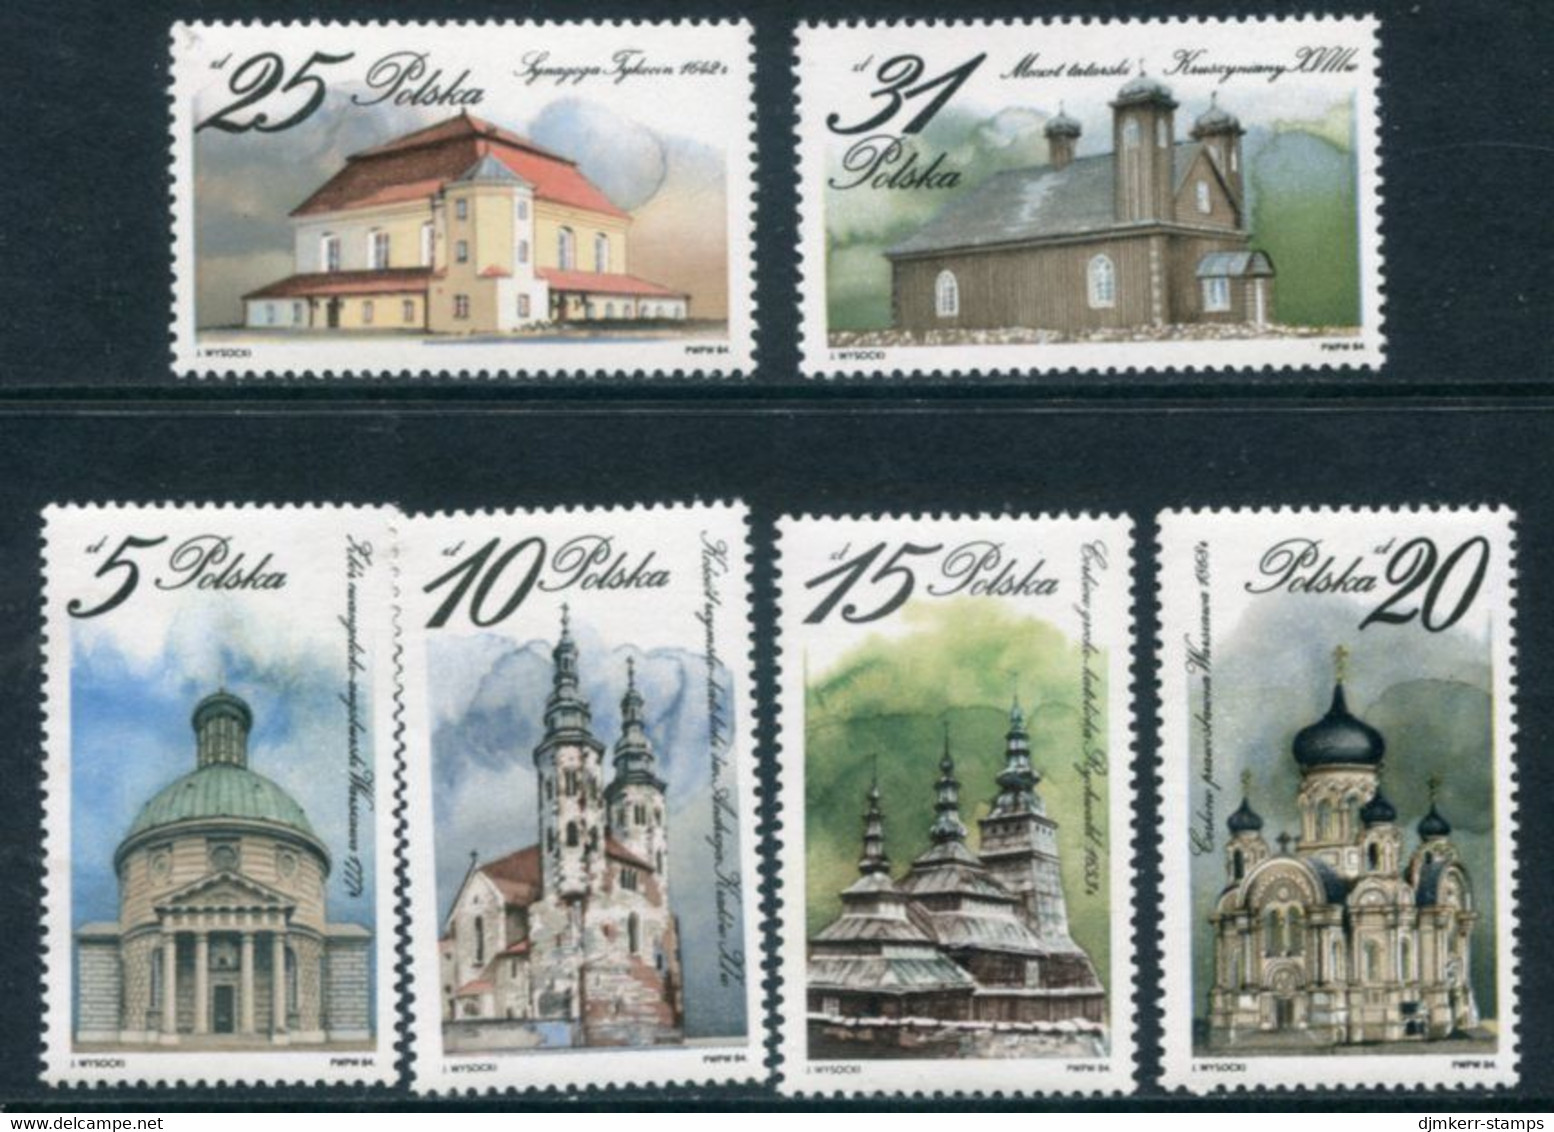 POLAND 1984 Religious Buildings MNH / **.  Michel 2954-59 - Unused Stamps